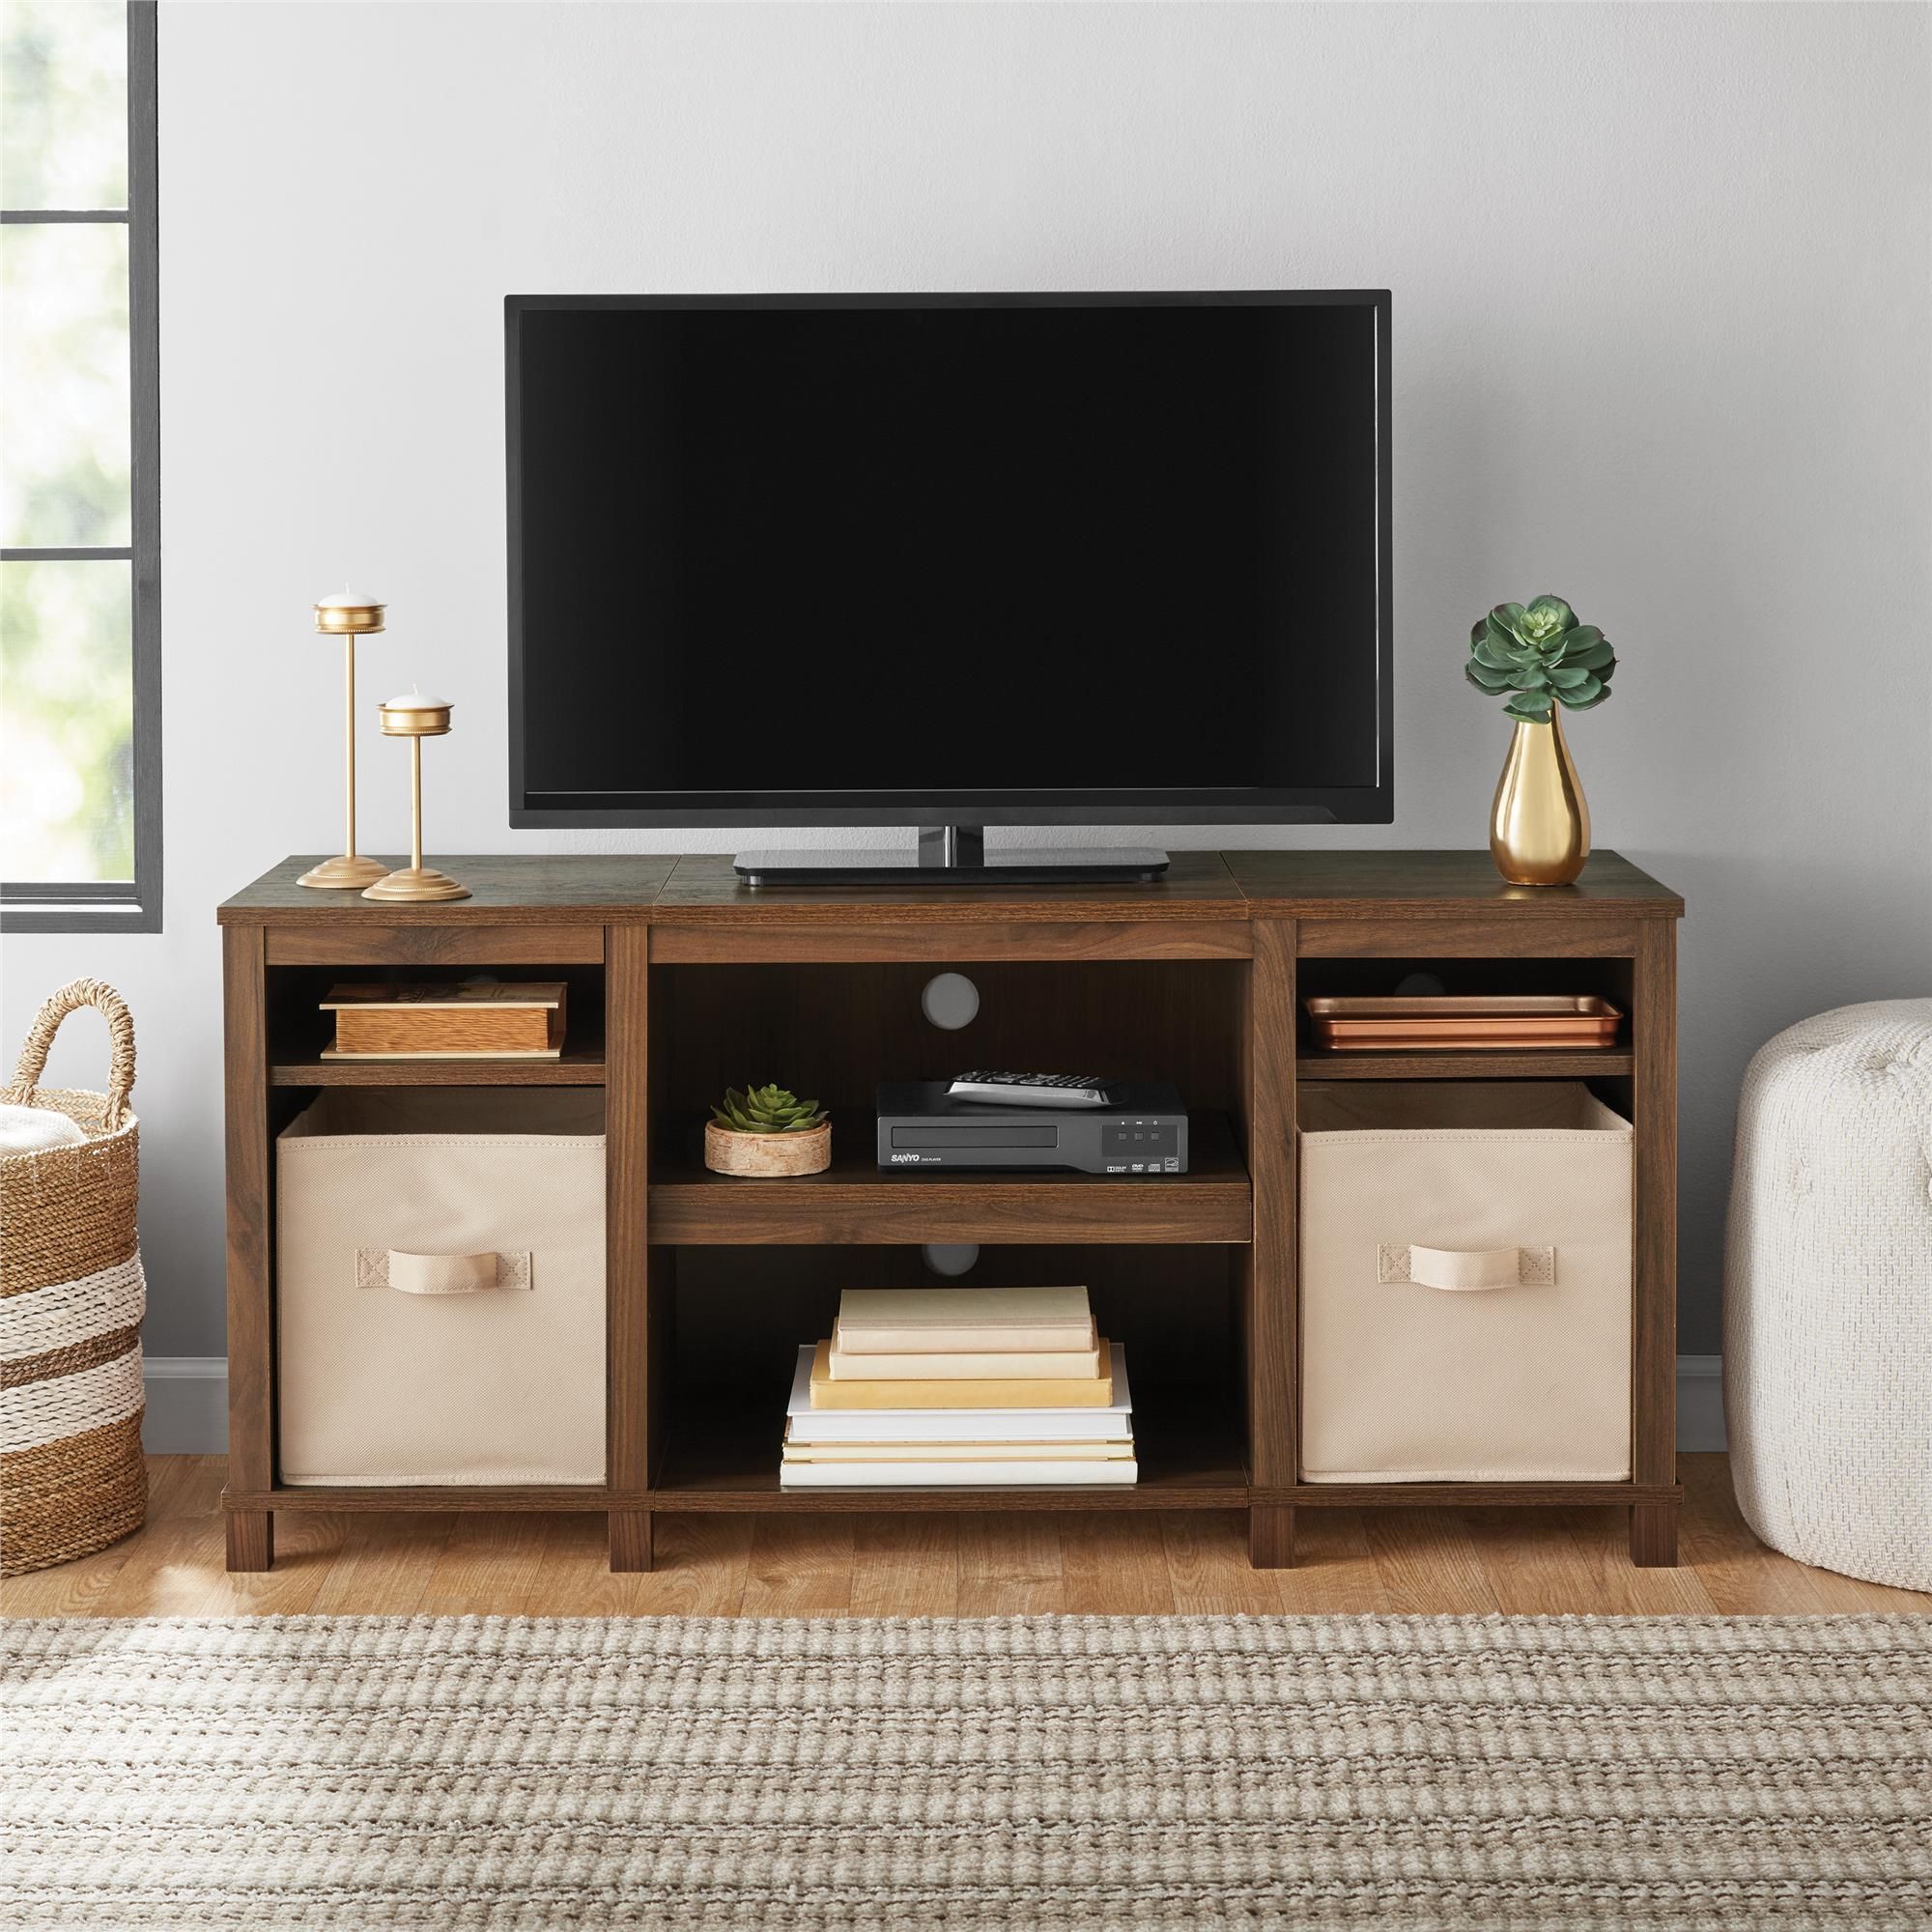 Mainstays Parsons Cubby Tv Stand For Tvs Up To 50", Walnut With Regard To Allegra Tv Stands For Tvs Up To 50" (View 2 of 15)